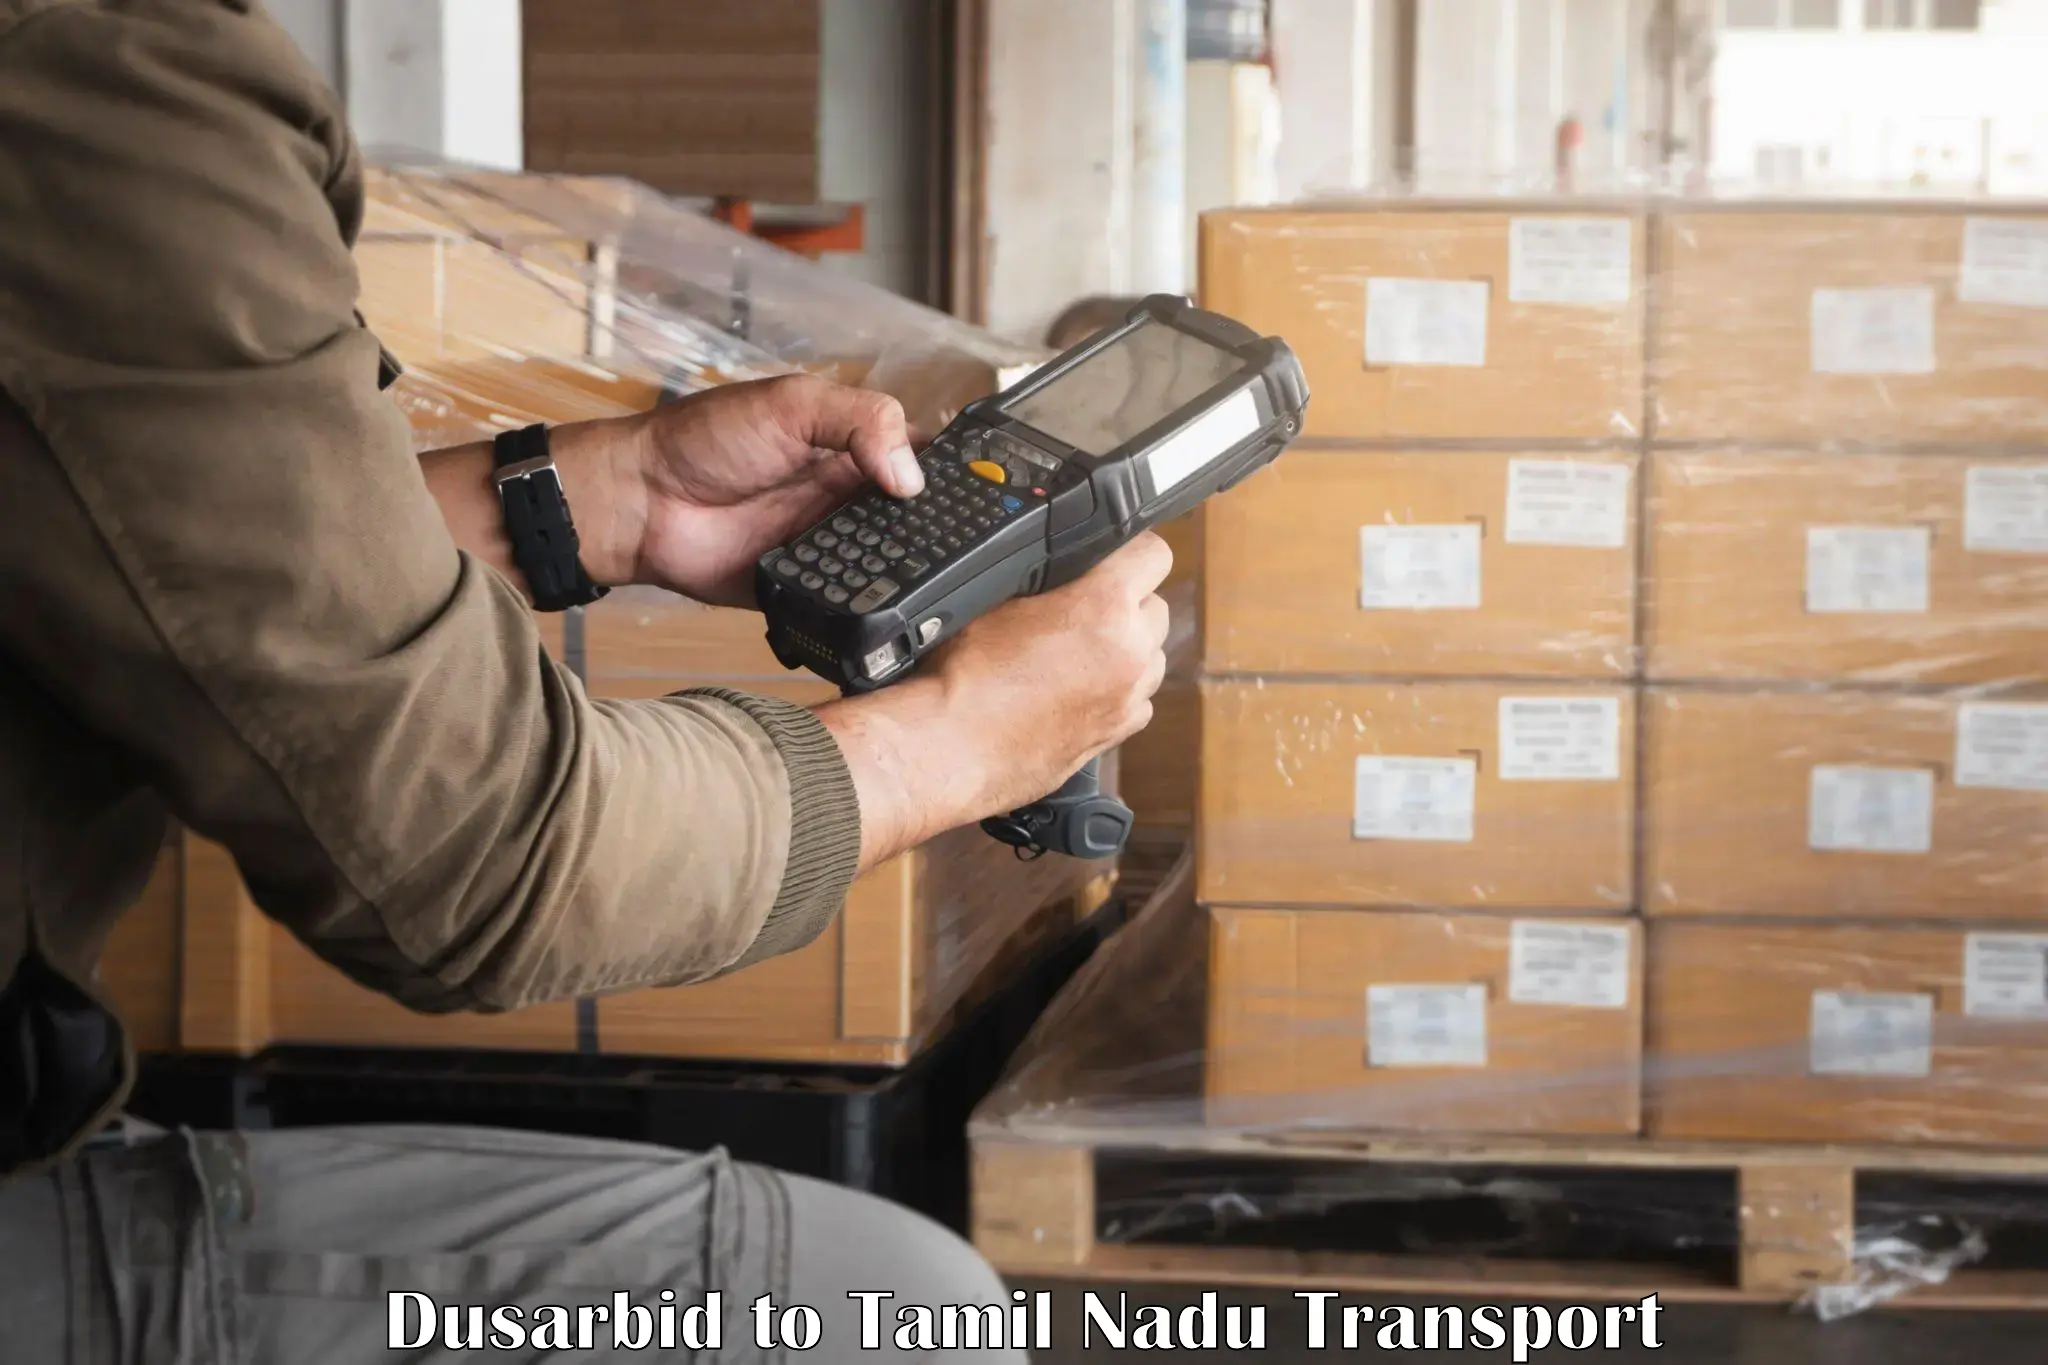 Shipping services Dusarbid to Tamil Nadu